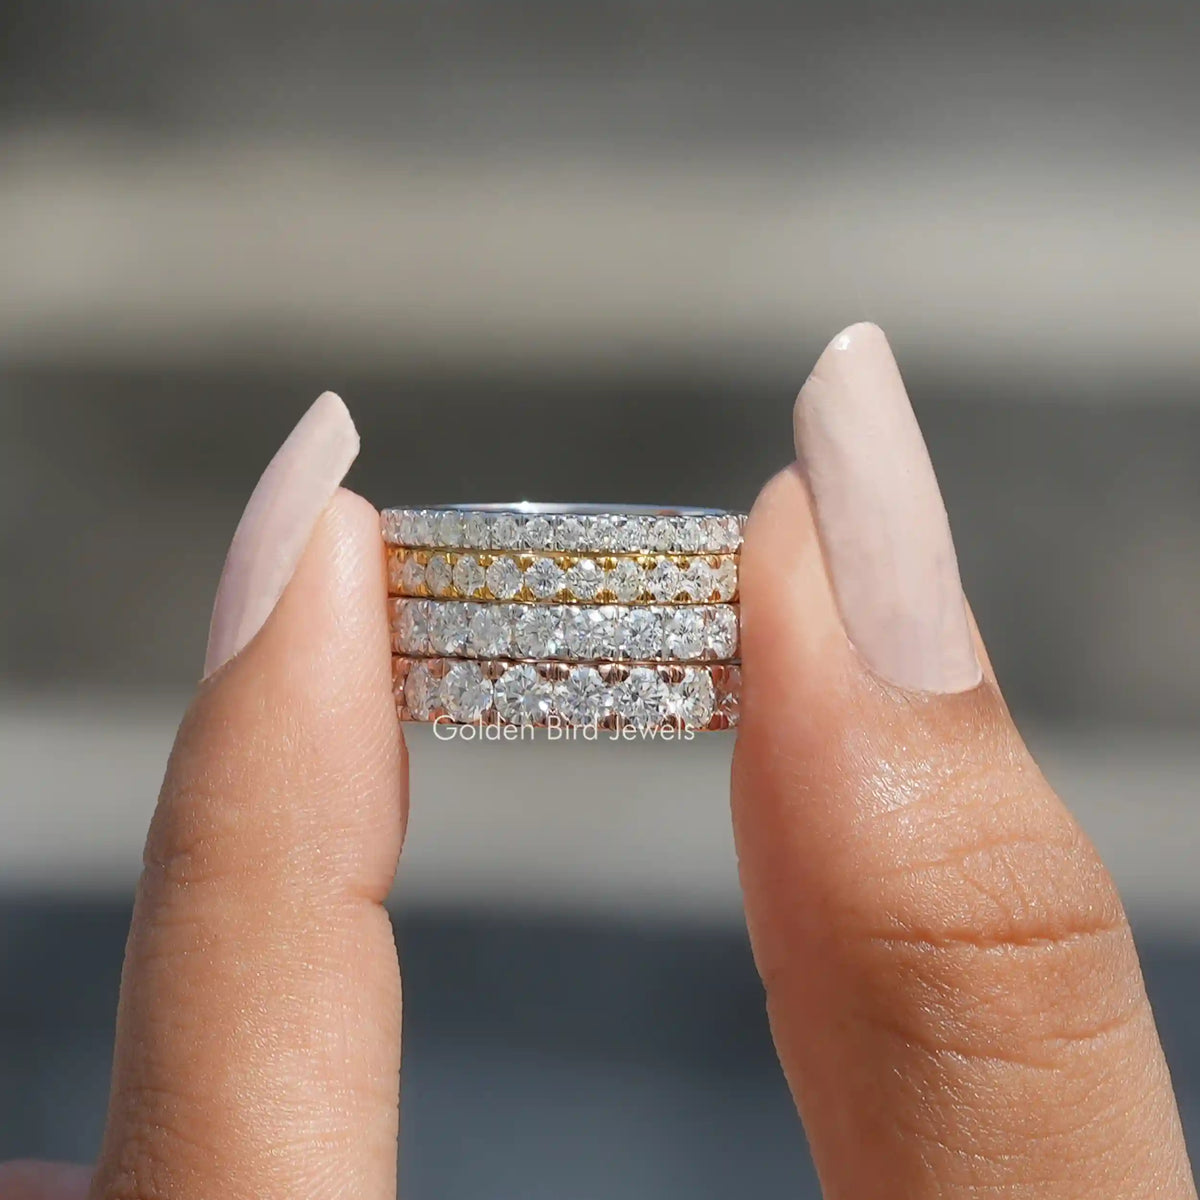 [In two finger front view of round cut eternity bands made of prong setting]-[Golden Bird Jewels]